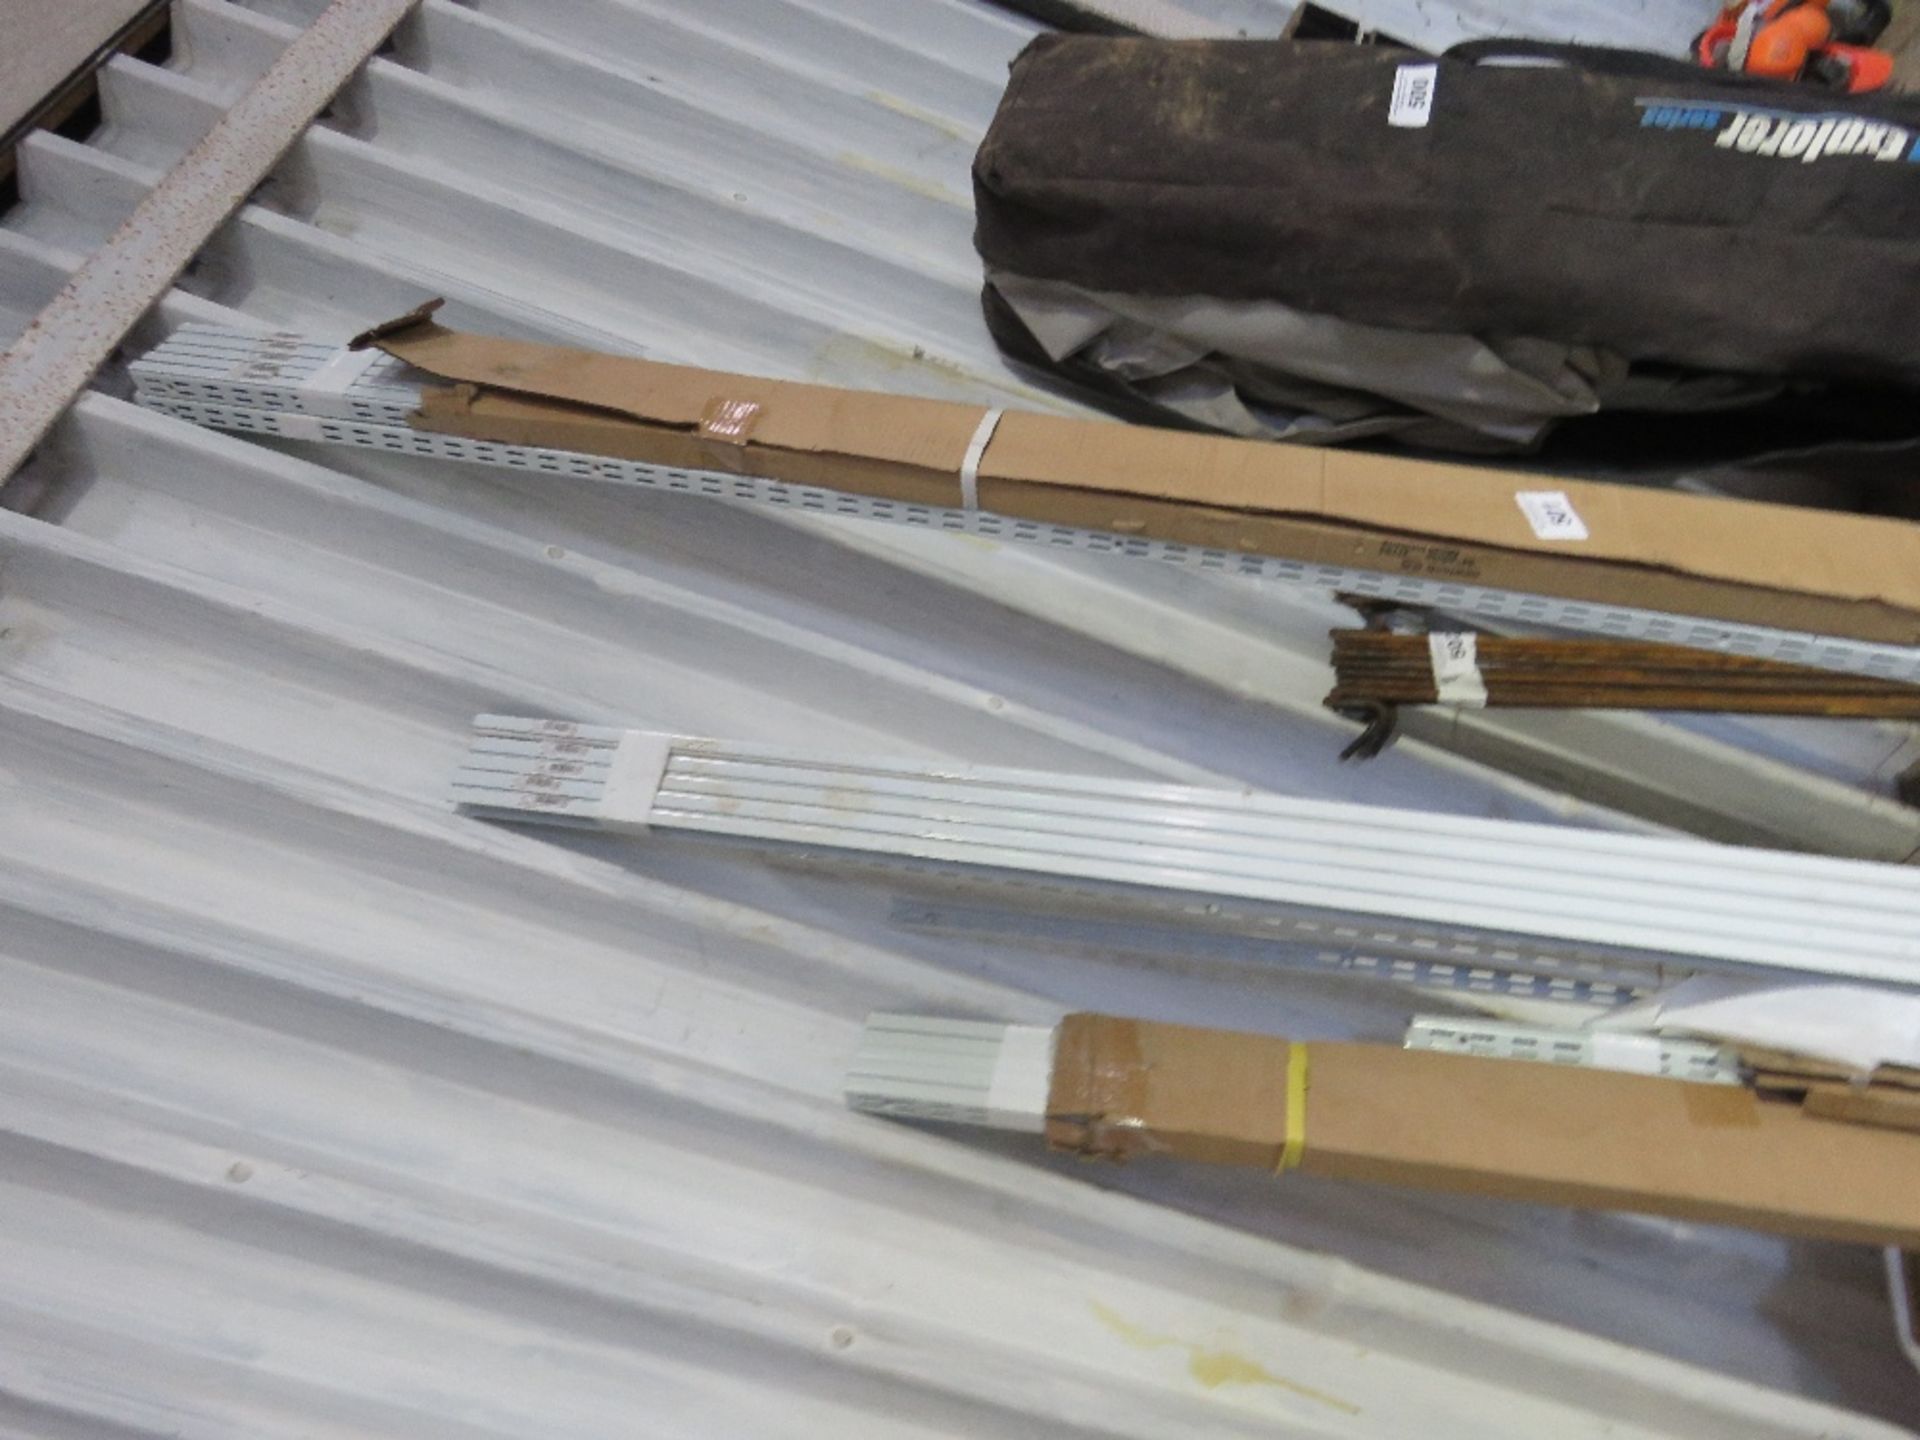 LARGE QUANTITY OF MODULAR SHELVING PARTS. DIRECT FROM LOCAL LANDSCAPE COMPANY WHO ARE CLOSING A DEPO - Image 5 of 6